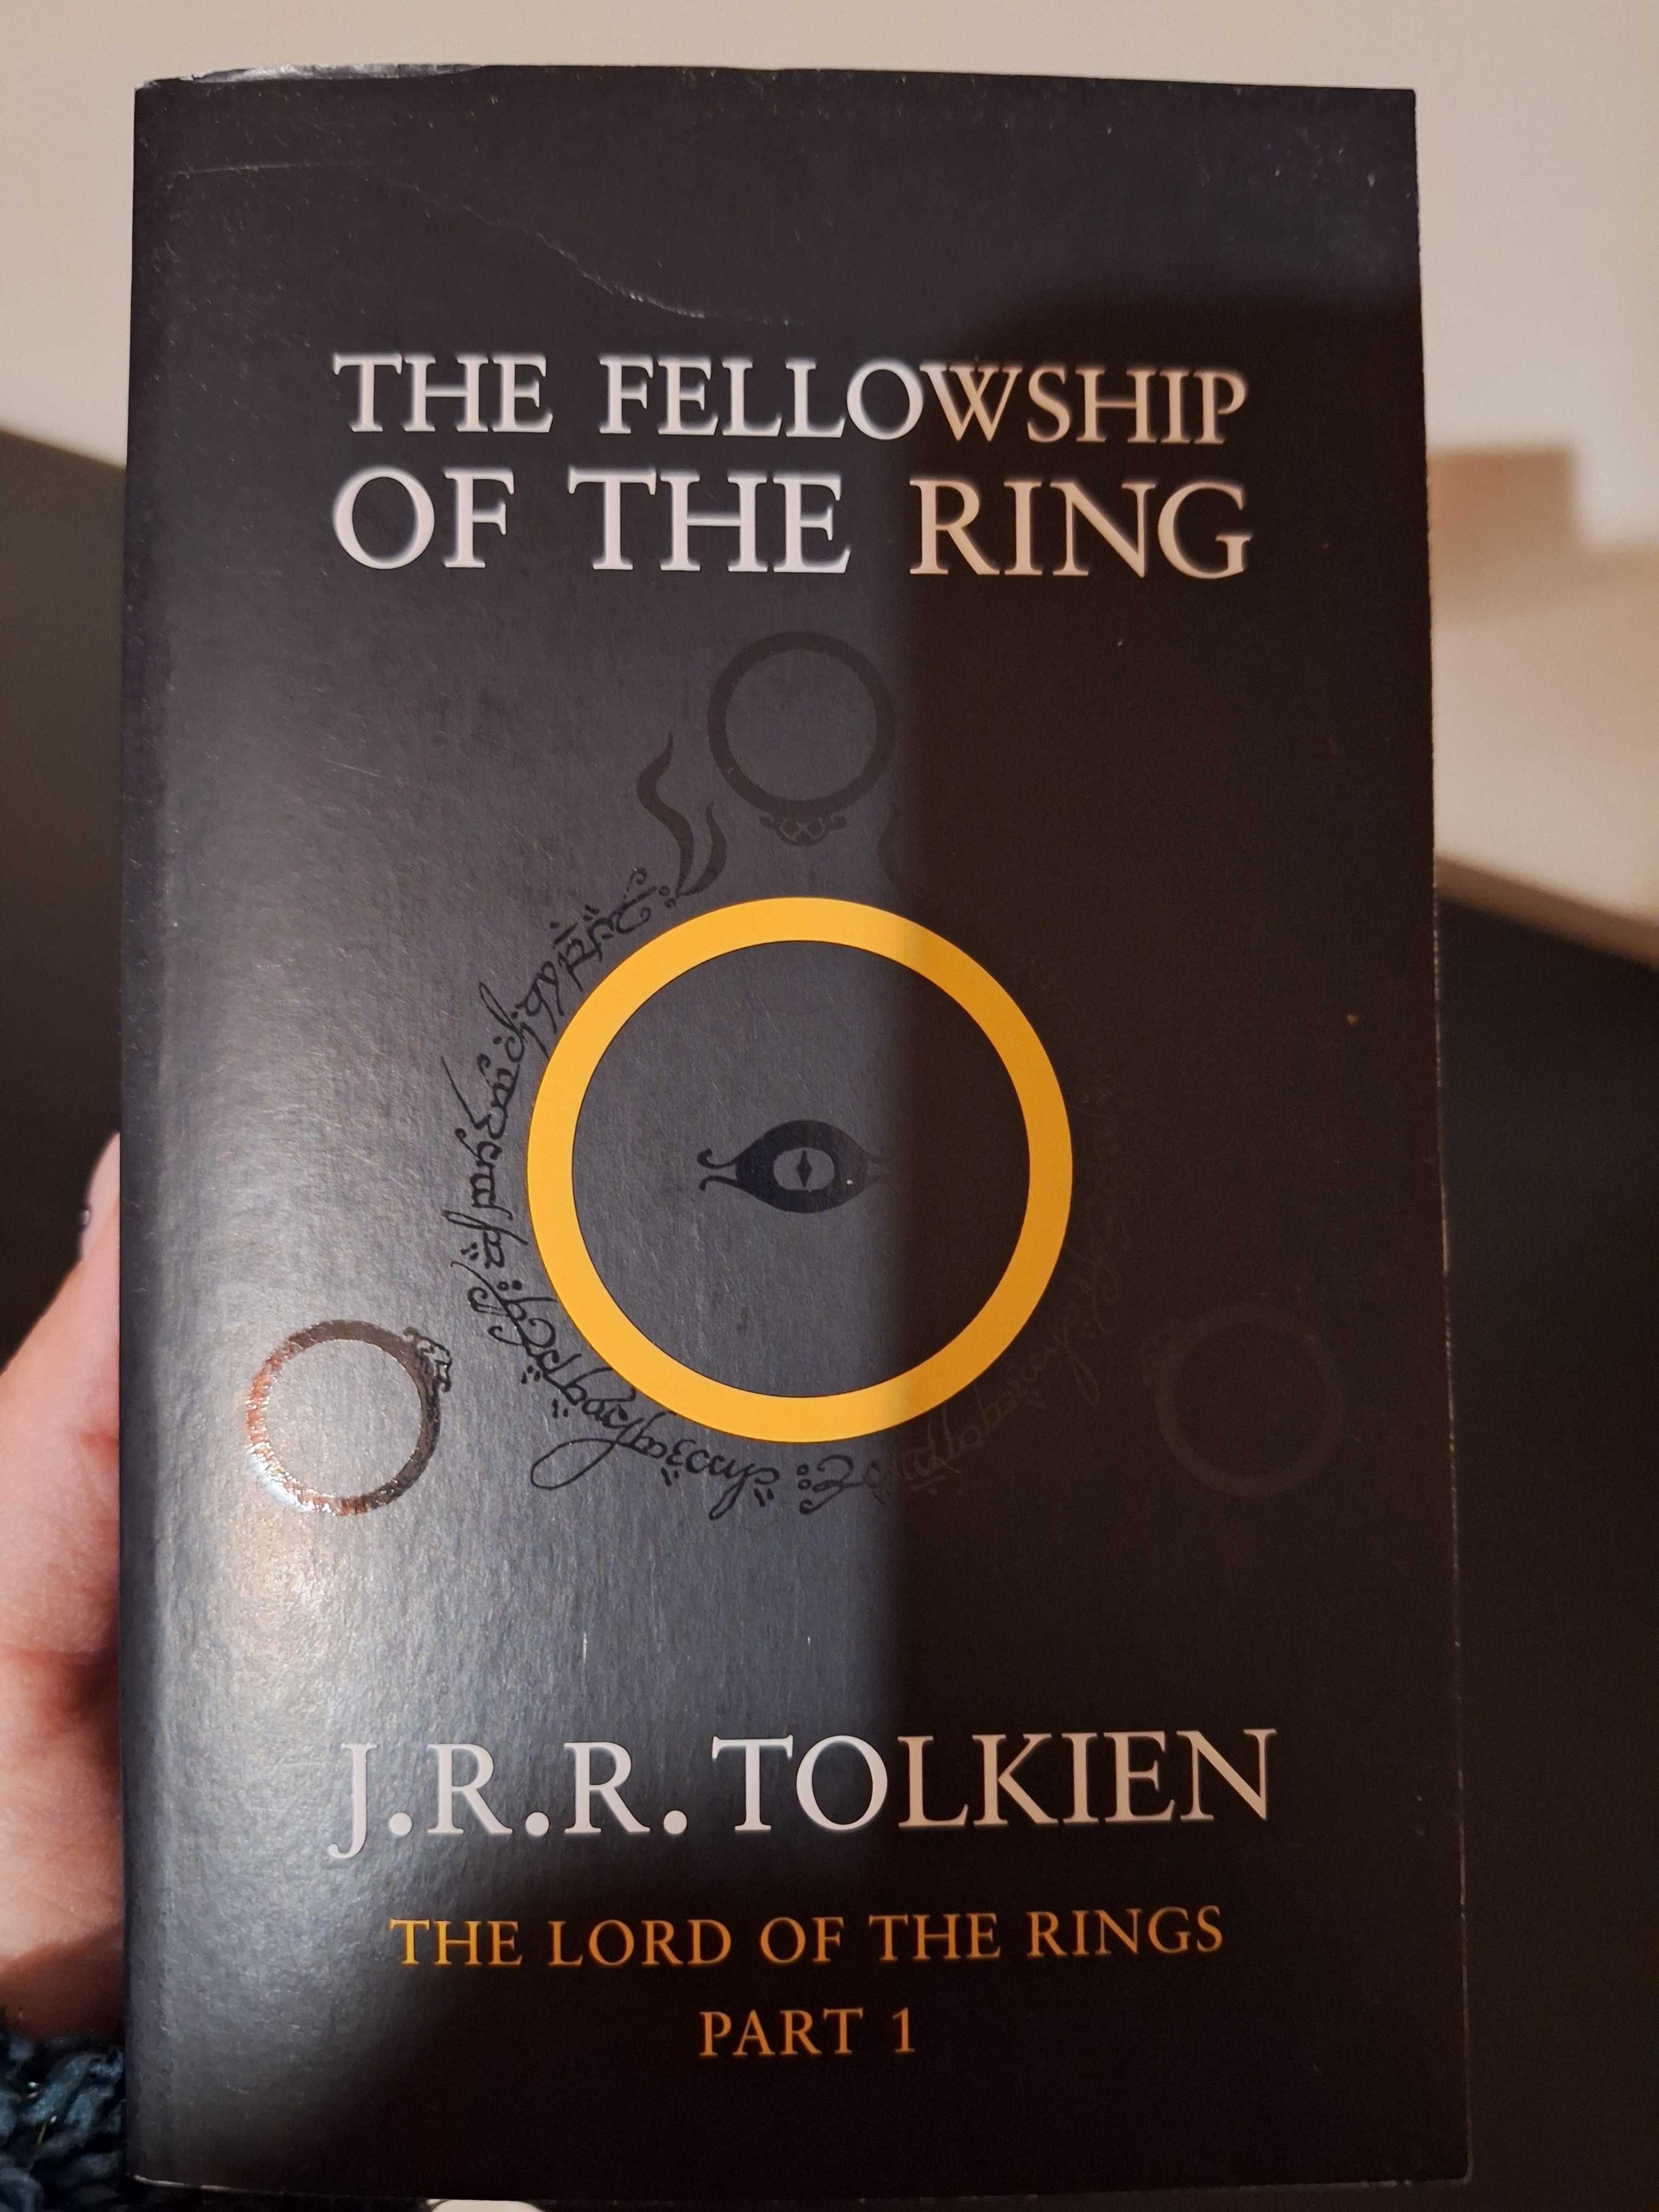 Lord of The rings- Fellowship of The ring